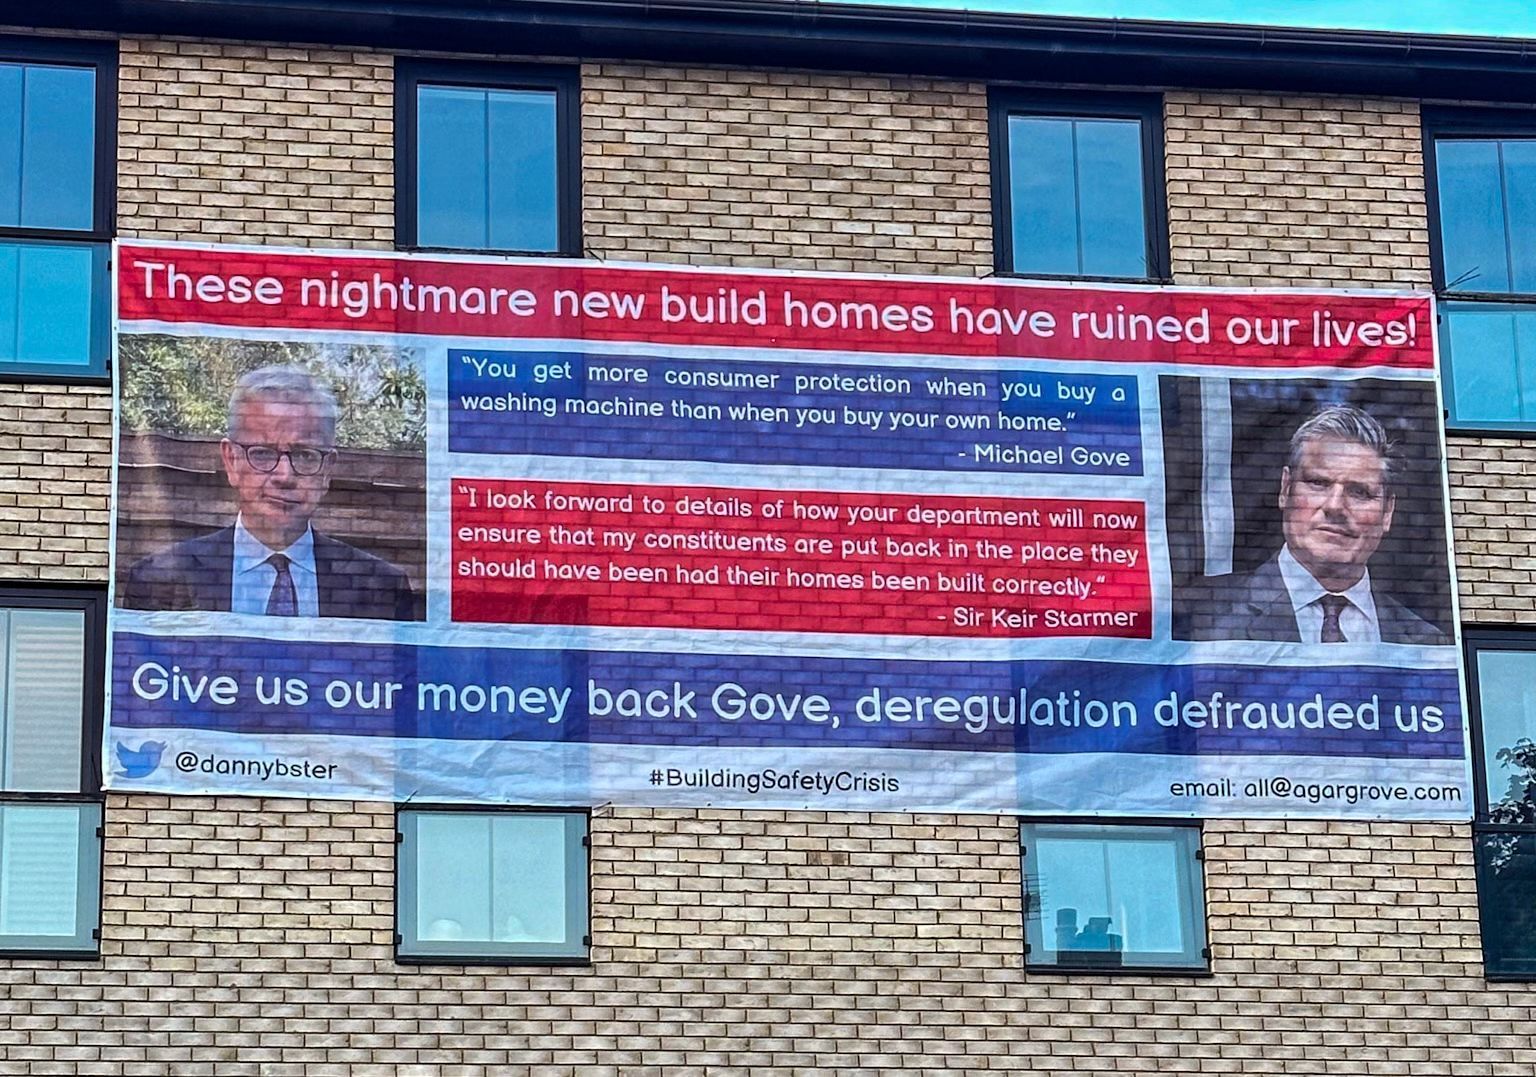 Agar grove with a banner outside with support expressed by housing minister Michael Gove and leader of the oppositionm, Keir Starker